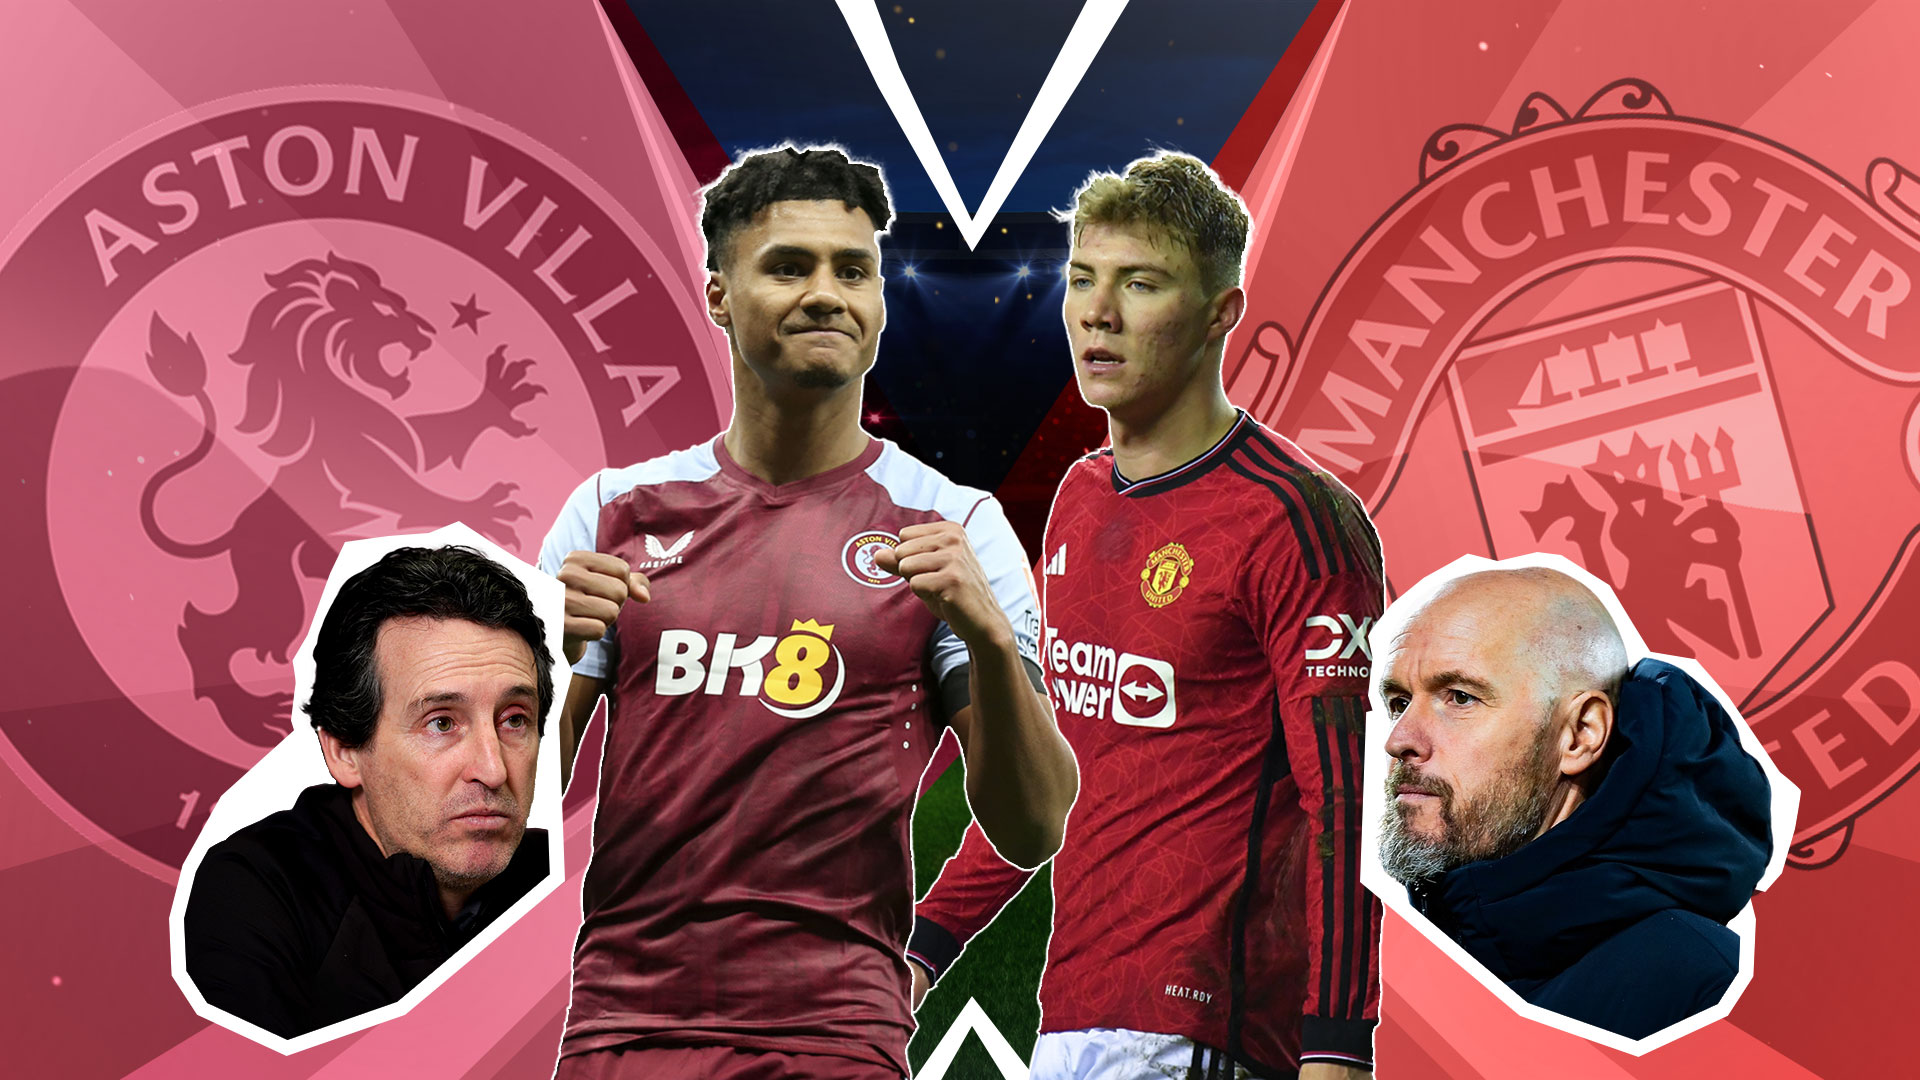 Aston Villa 1-2 Manchester United LIVE REACTION: McTominay scores late winner to give huge boost to Red Devils' Champions League hopes